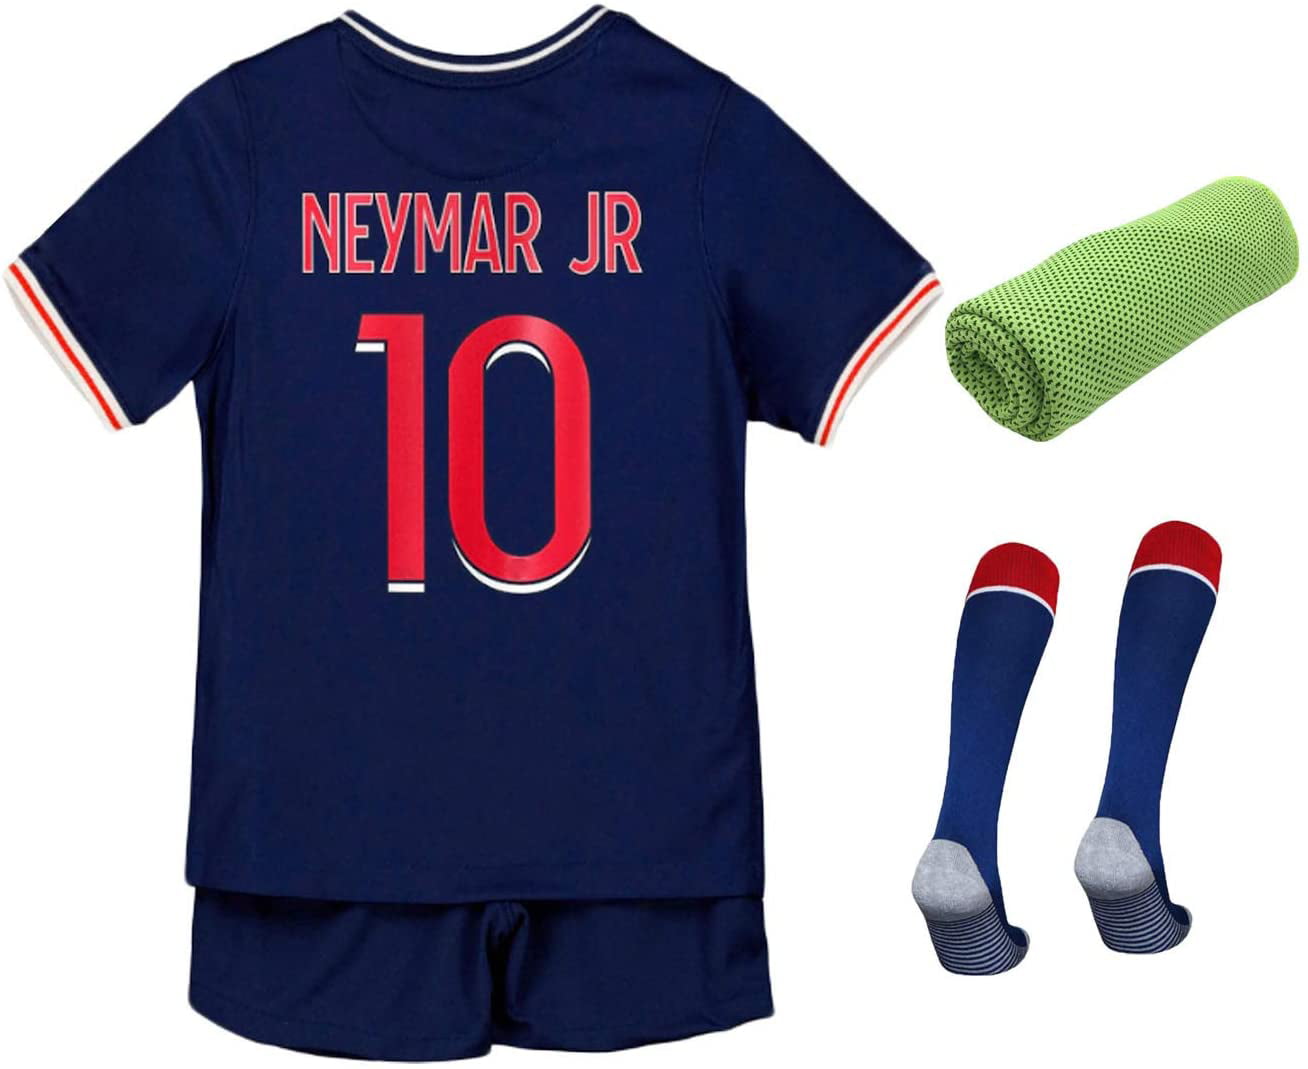 2022 Soccer Jersey for Kids Youth Football Kit Short Sleeved Jersey Shorts Socks Towel 4in1 Gift Set,Color Navy 